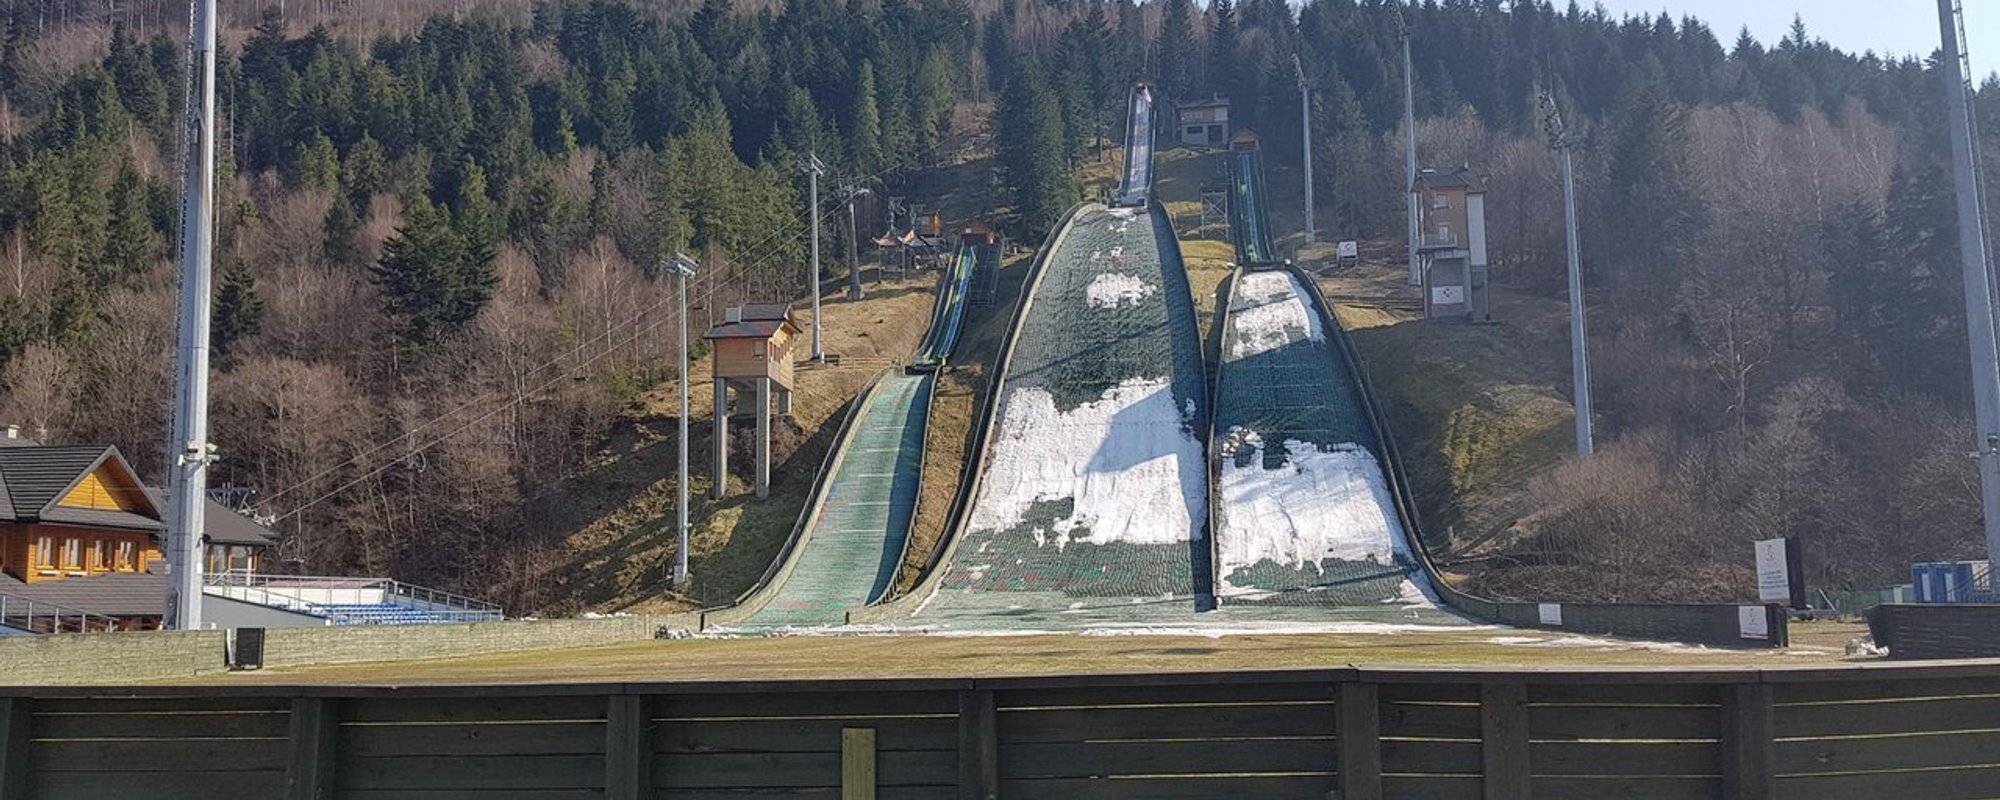 Skalite ski jump from a slightly different perspective.